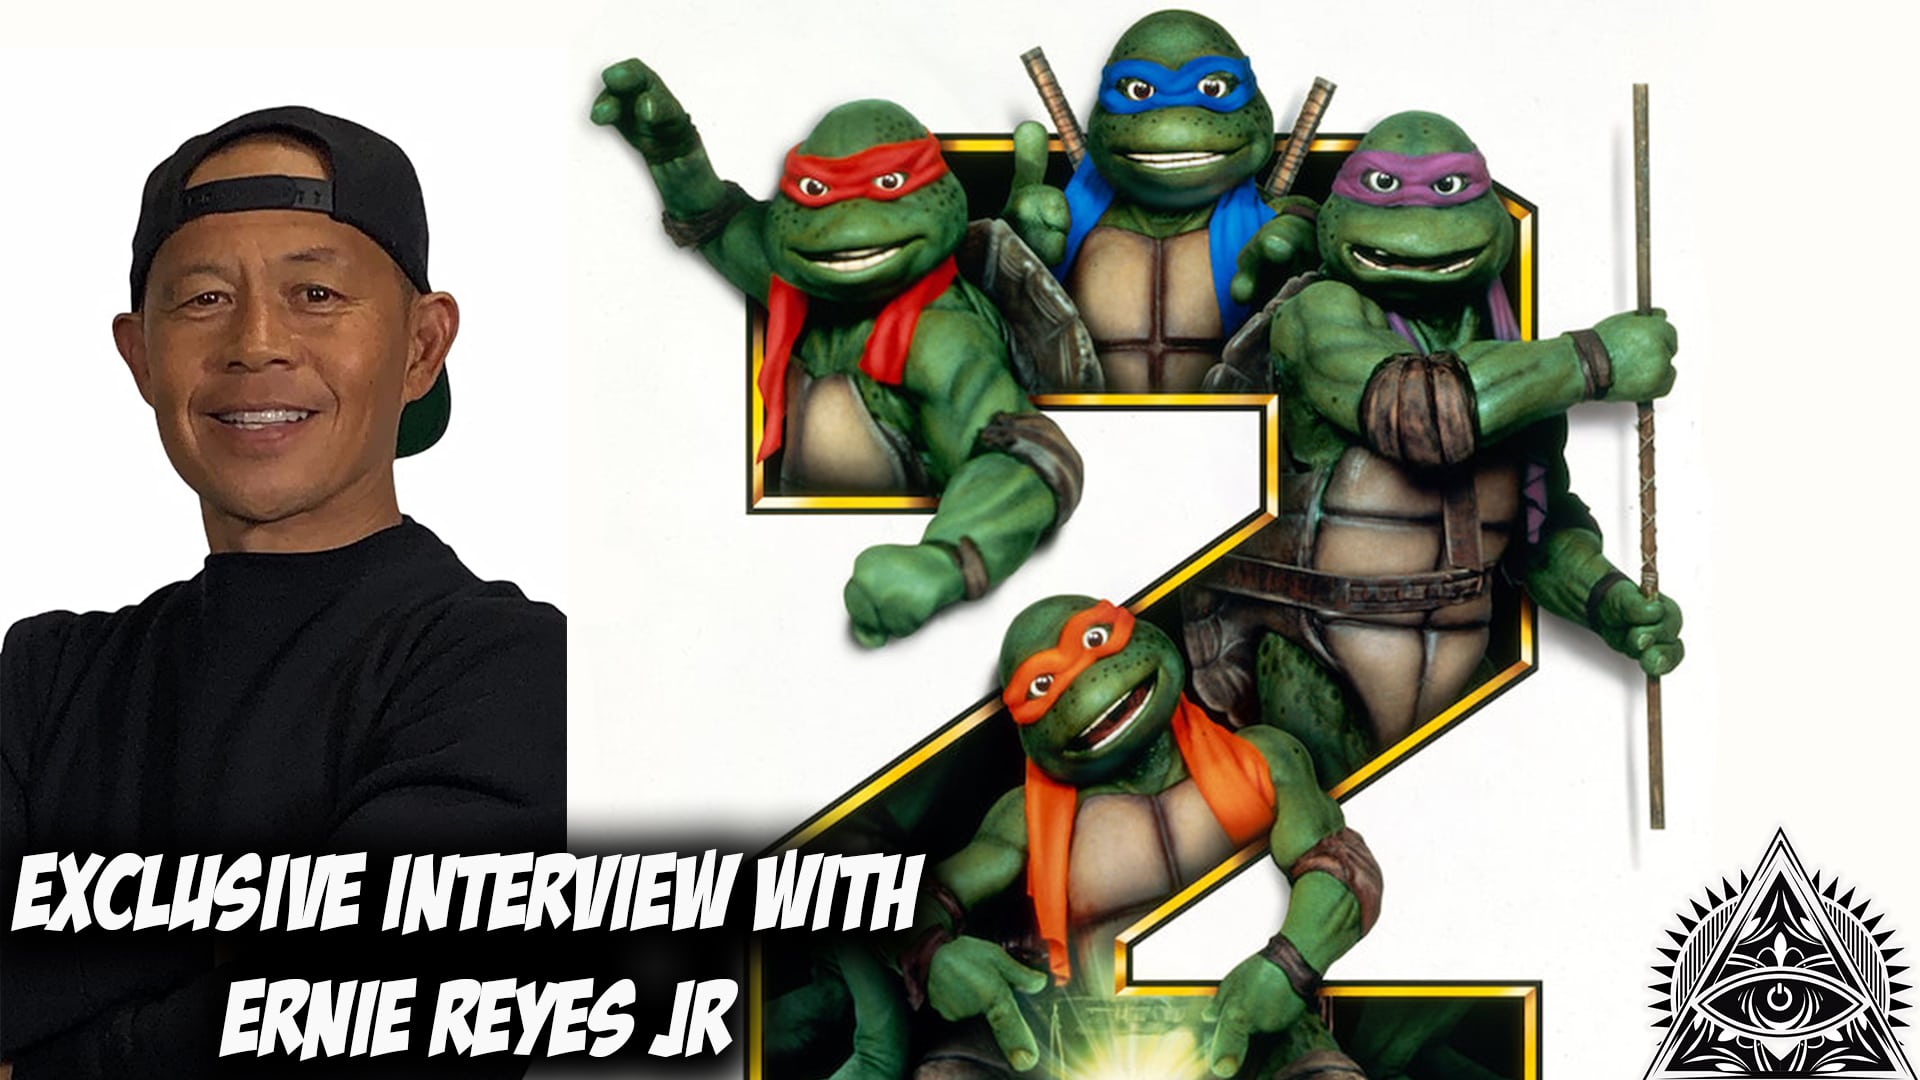 Ernie Reyes Jr. Paves Way for Filipino Americans With TMNT: Interview